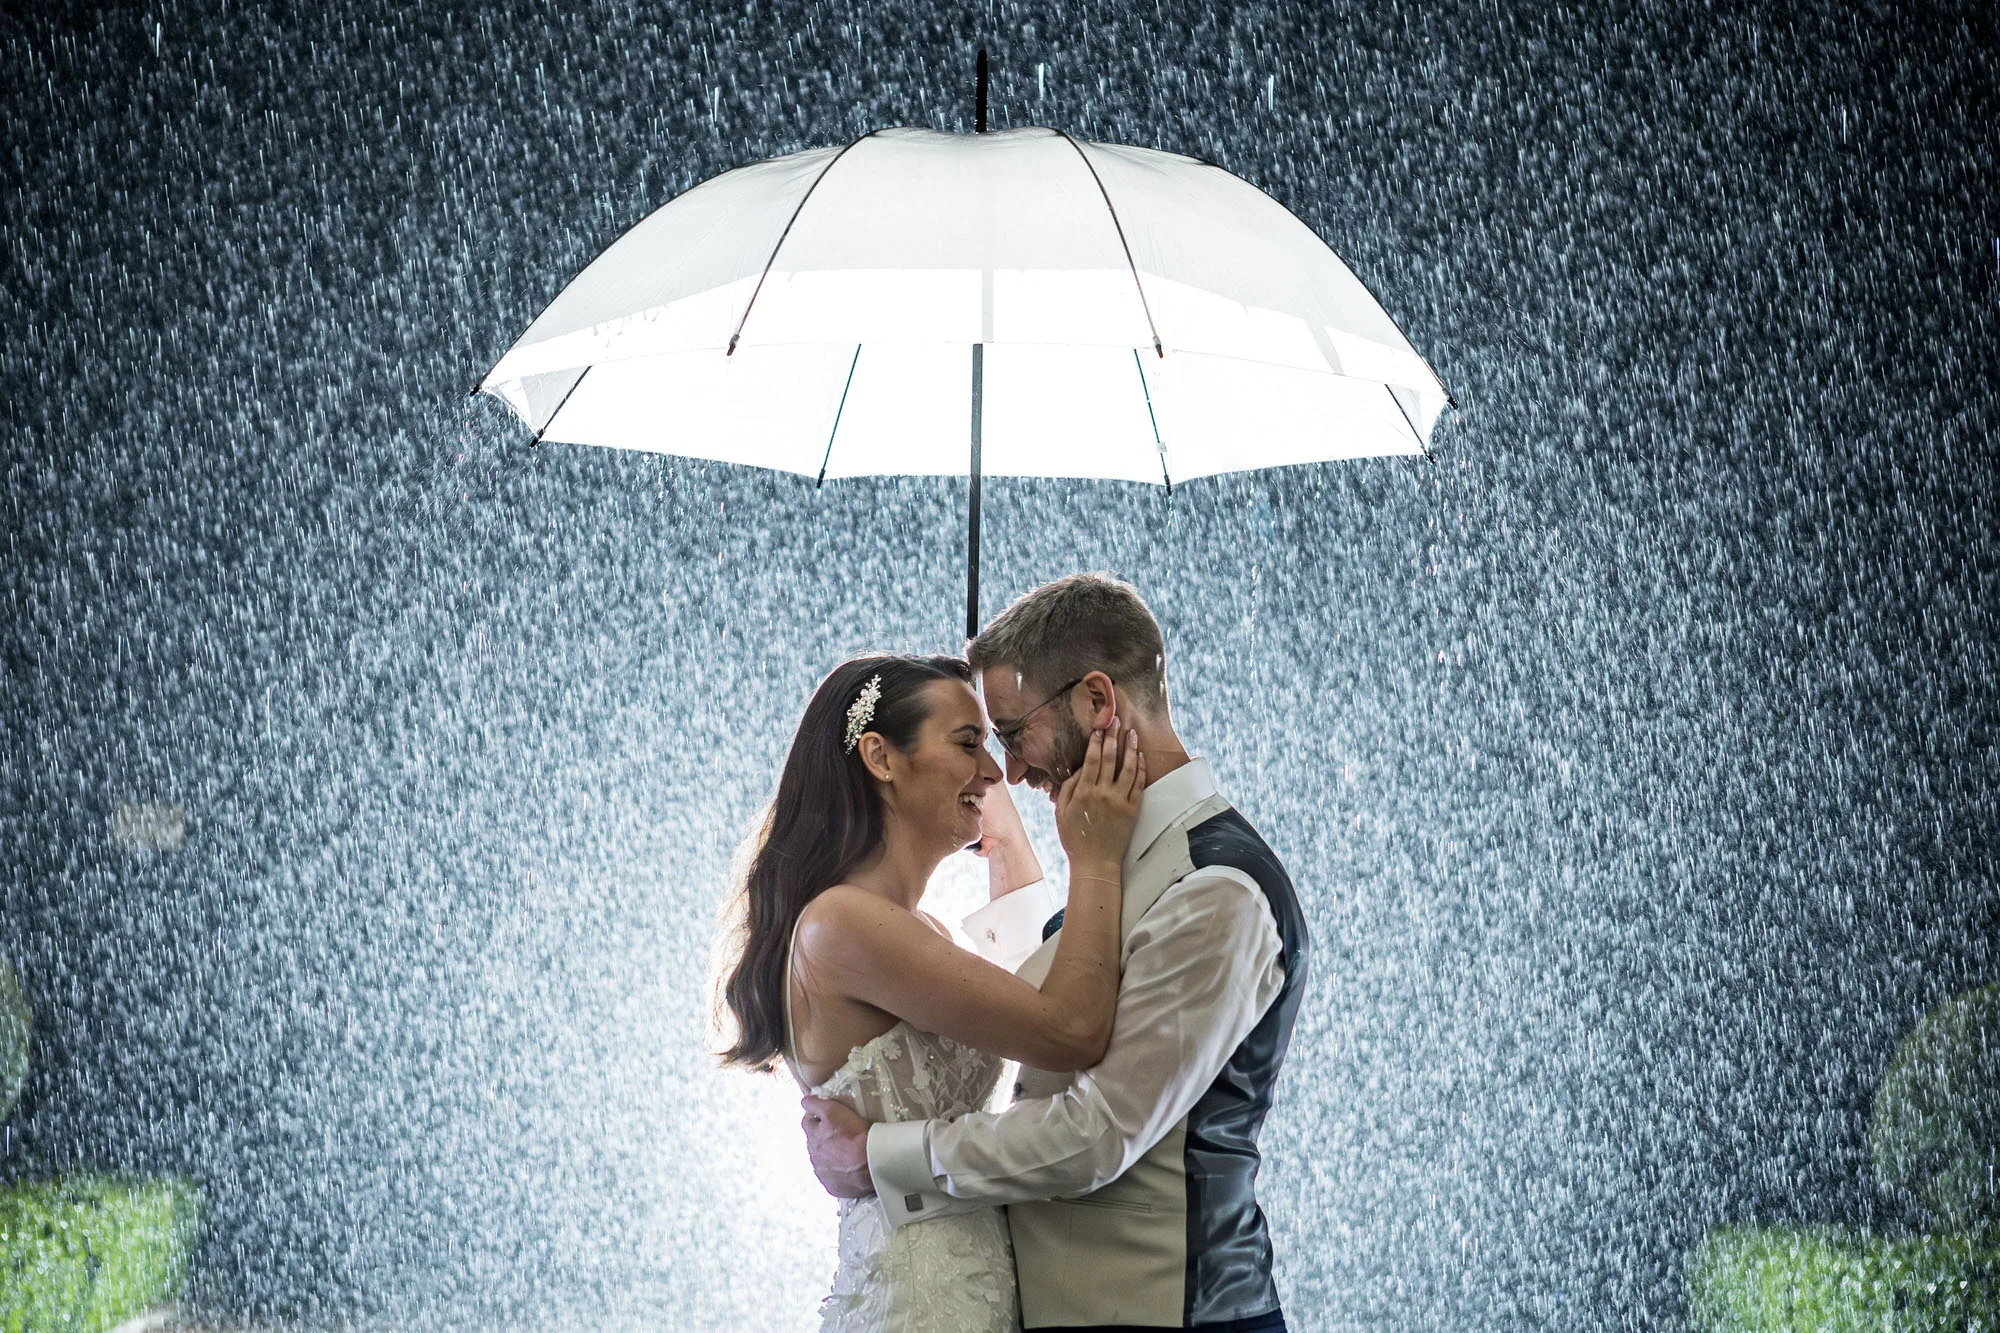 Sussex wedding photographer - a couple laugh together under a umbrella as a deluge of rain falls in the background, lit magically by external lighting